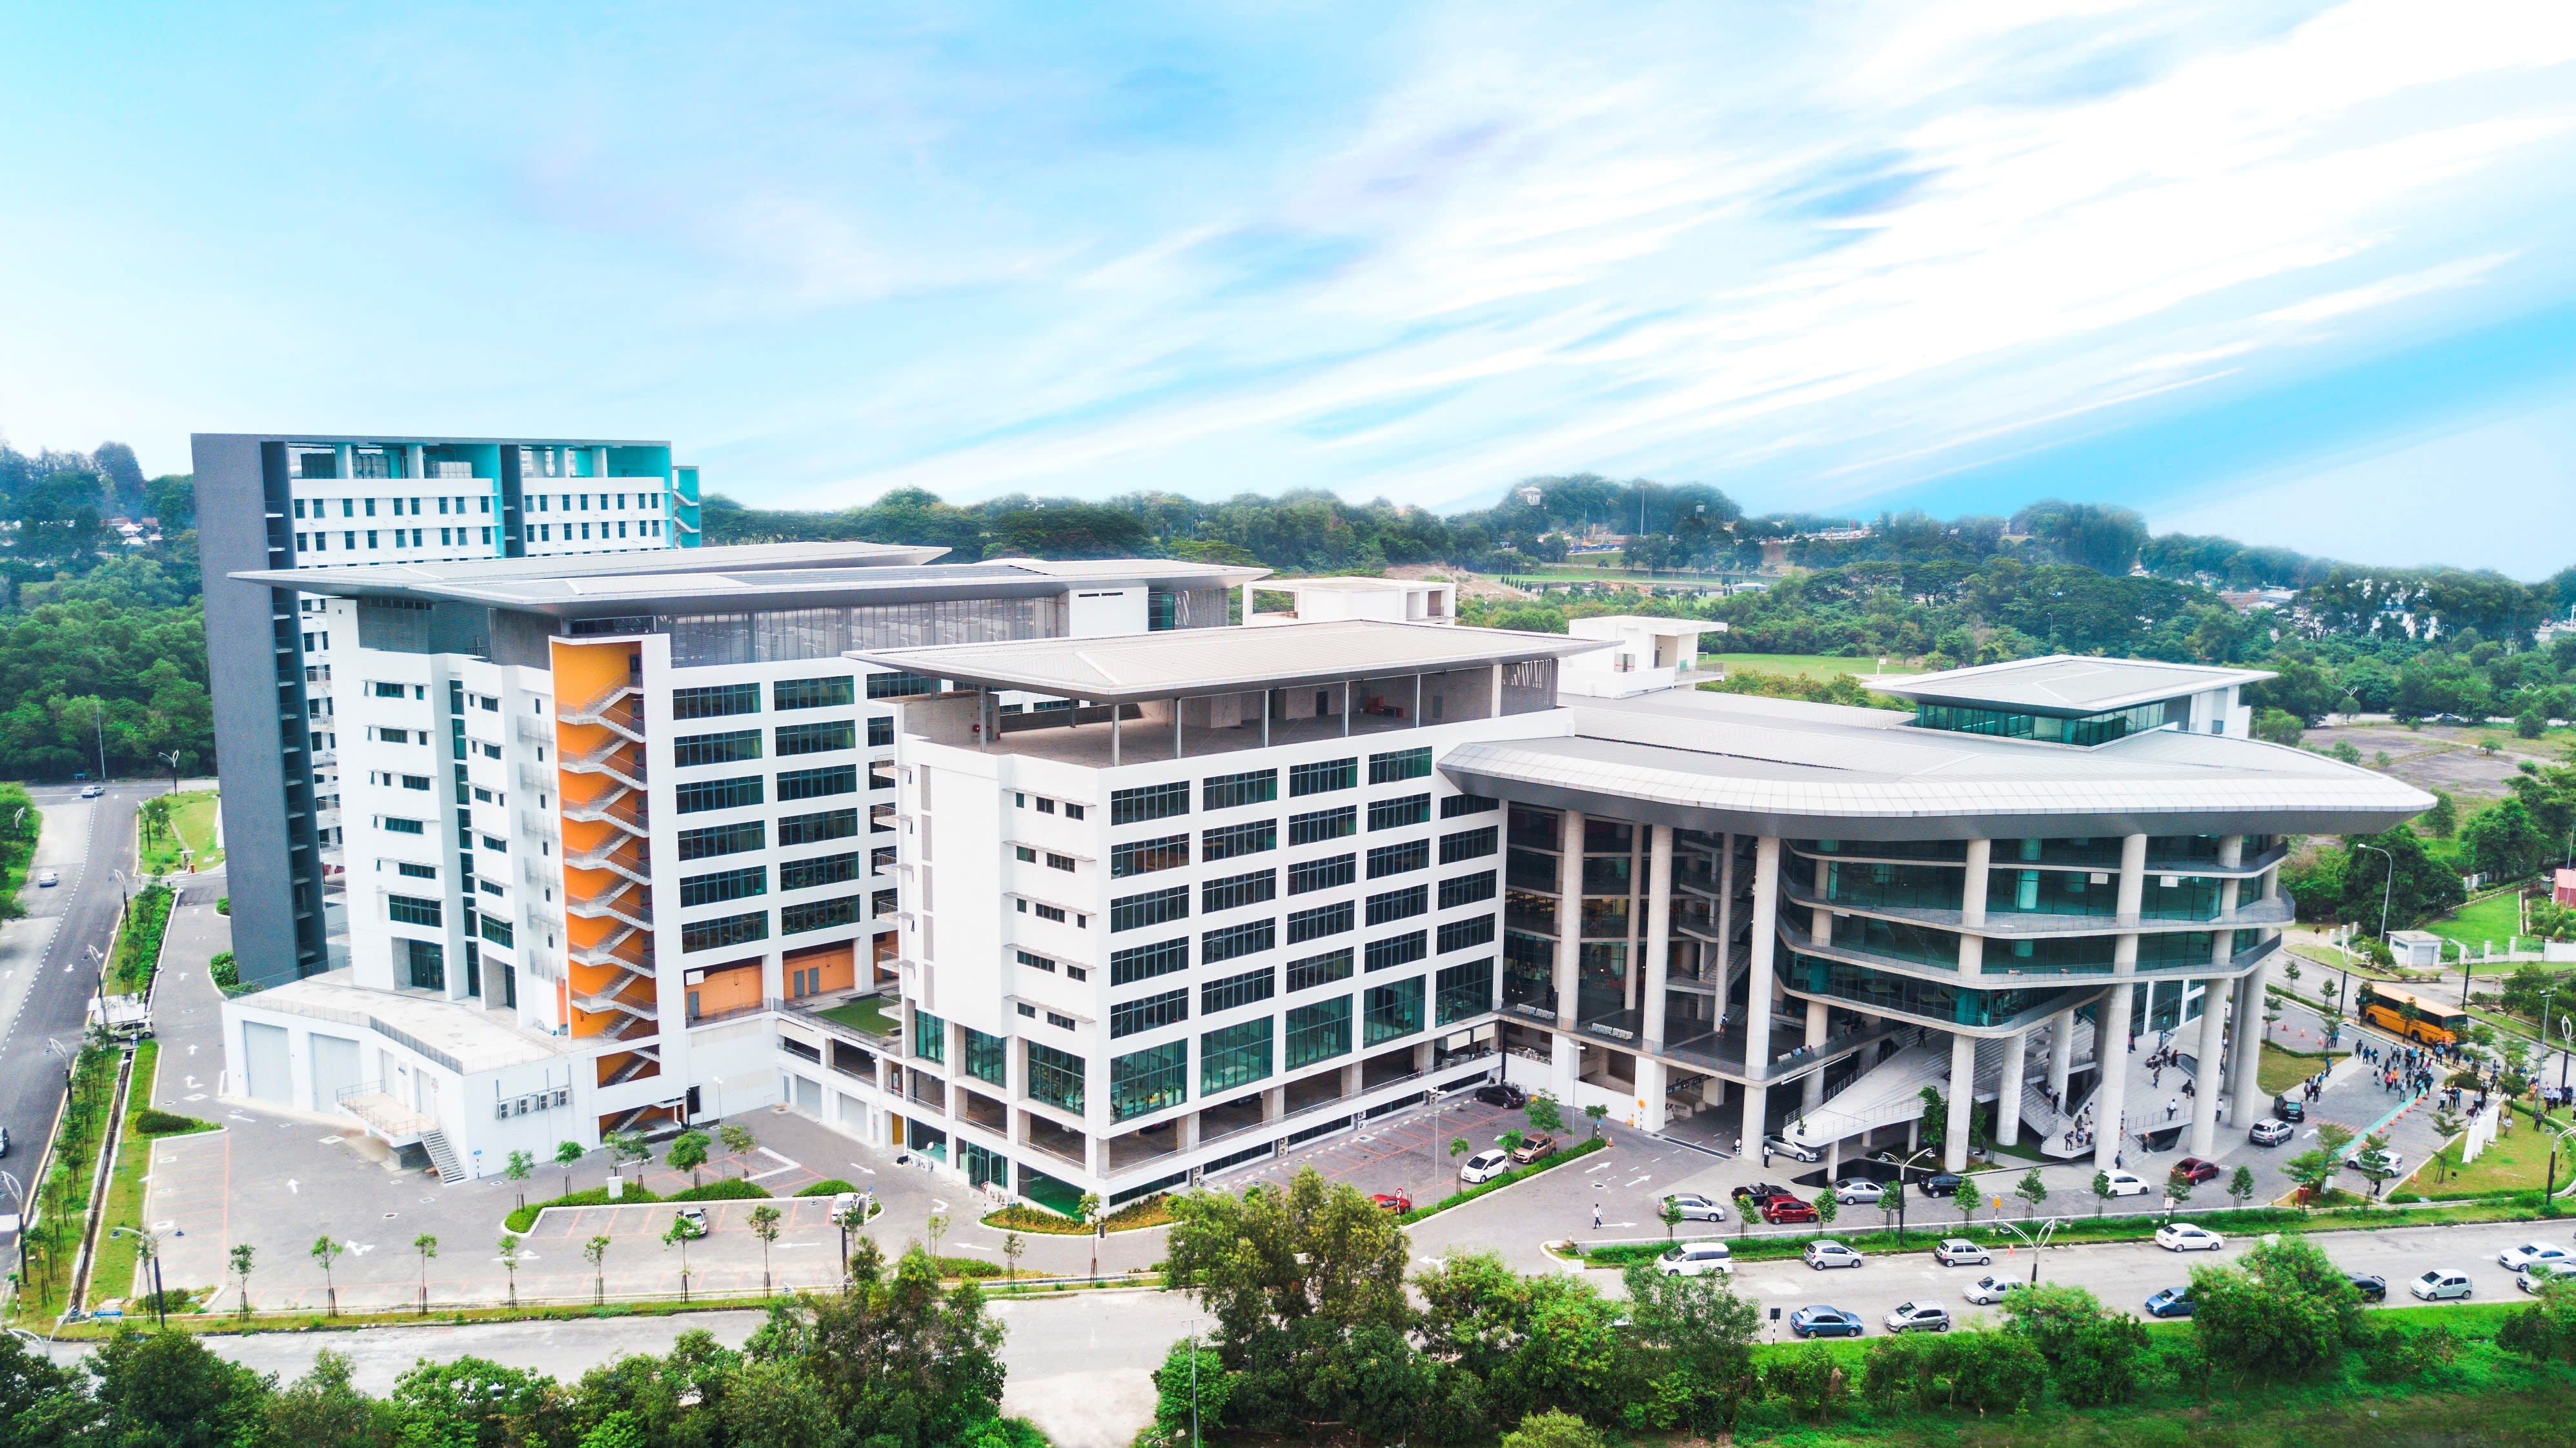 Malaysia University Science And Technology The Major Seasons Of Intakes Are February July And